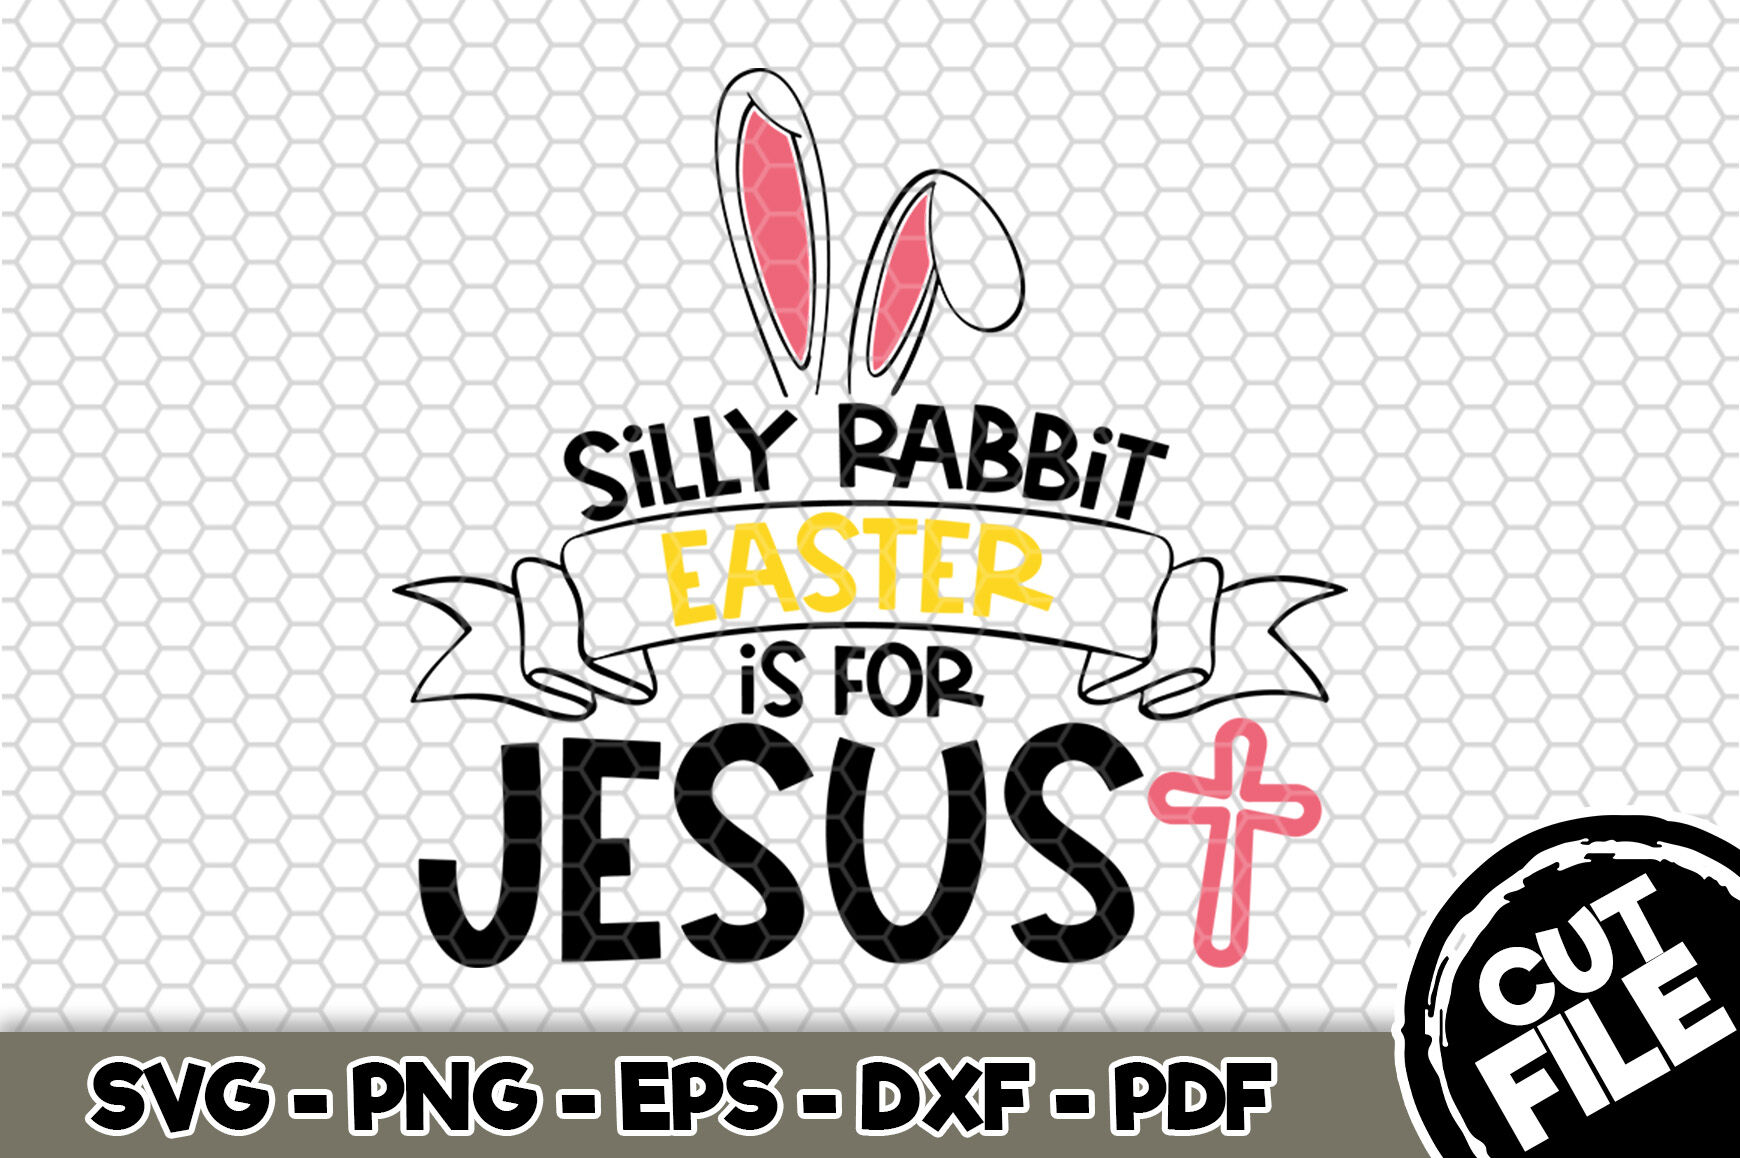 Silly Rabbit Easter Is For Jesus SVG Cut File n185 By SvgArtsy